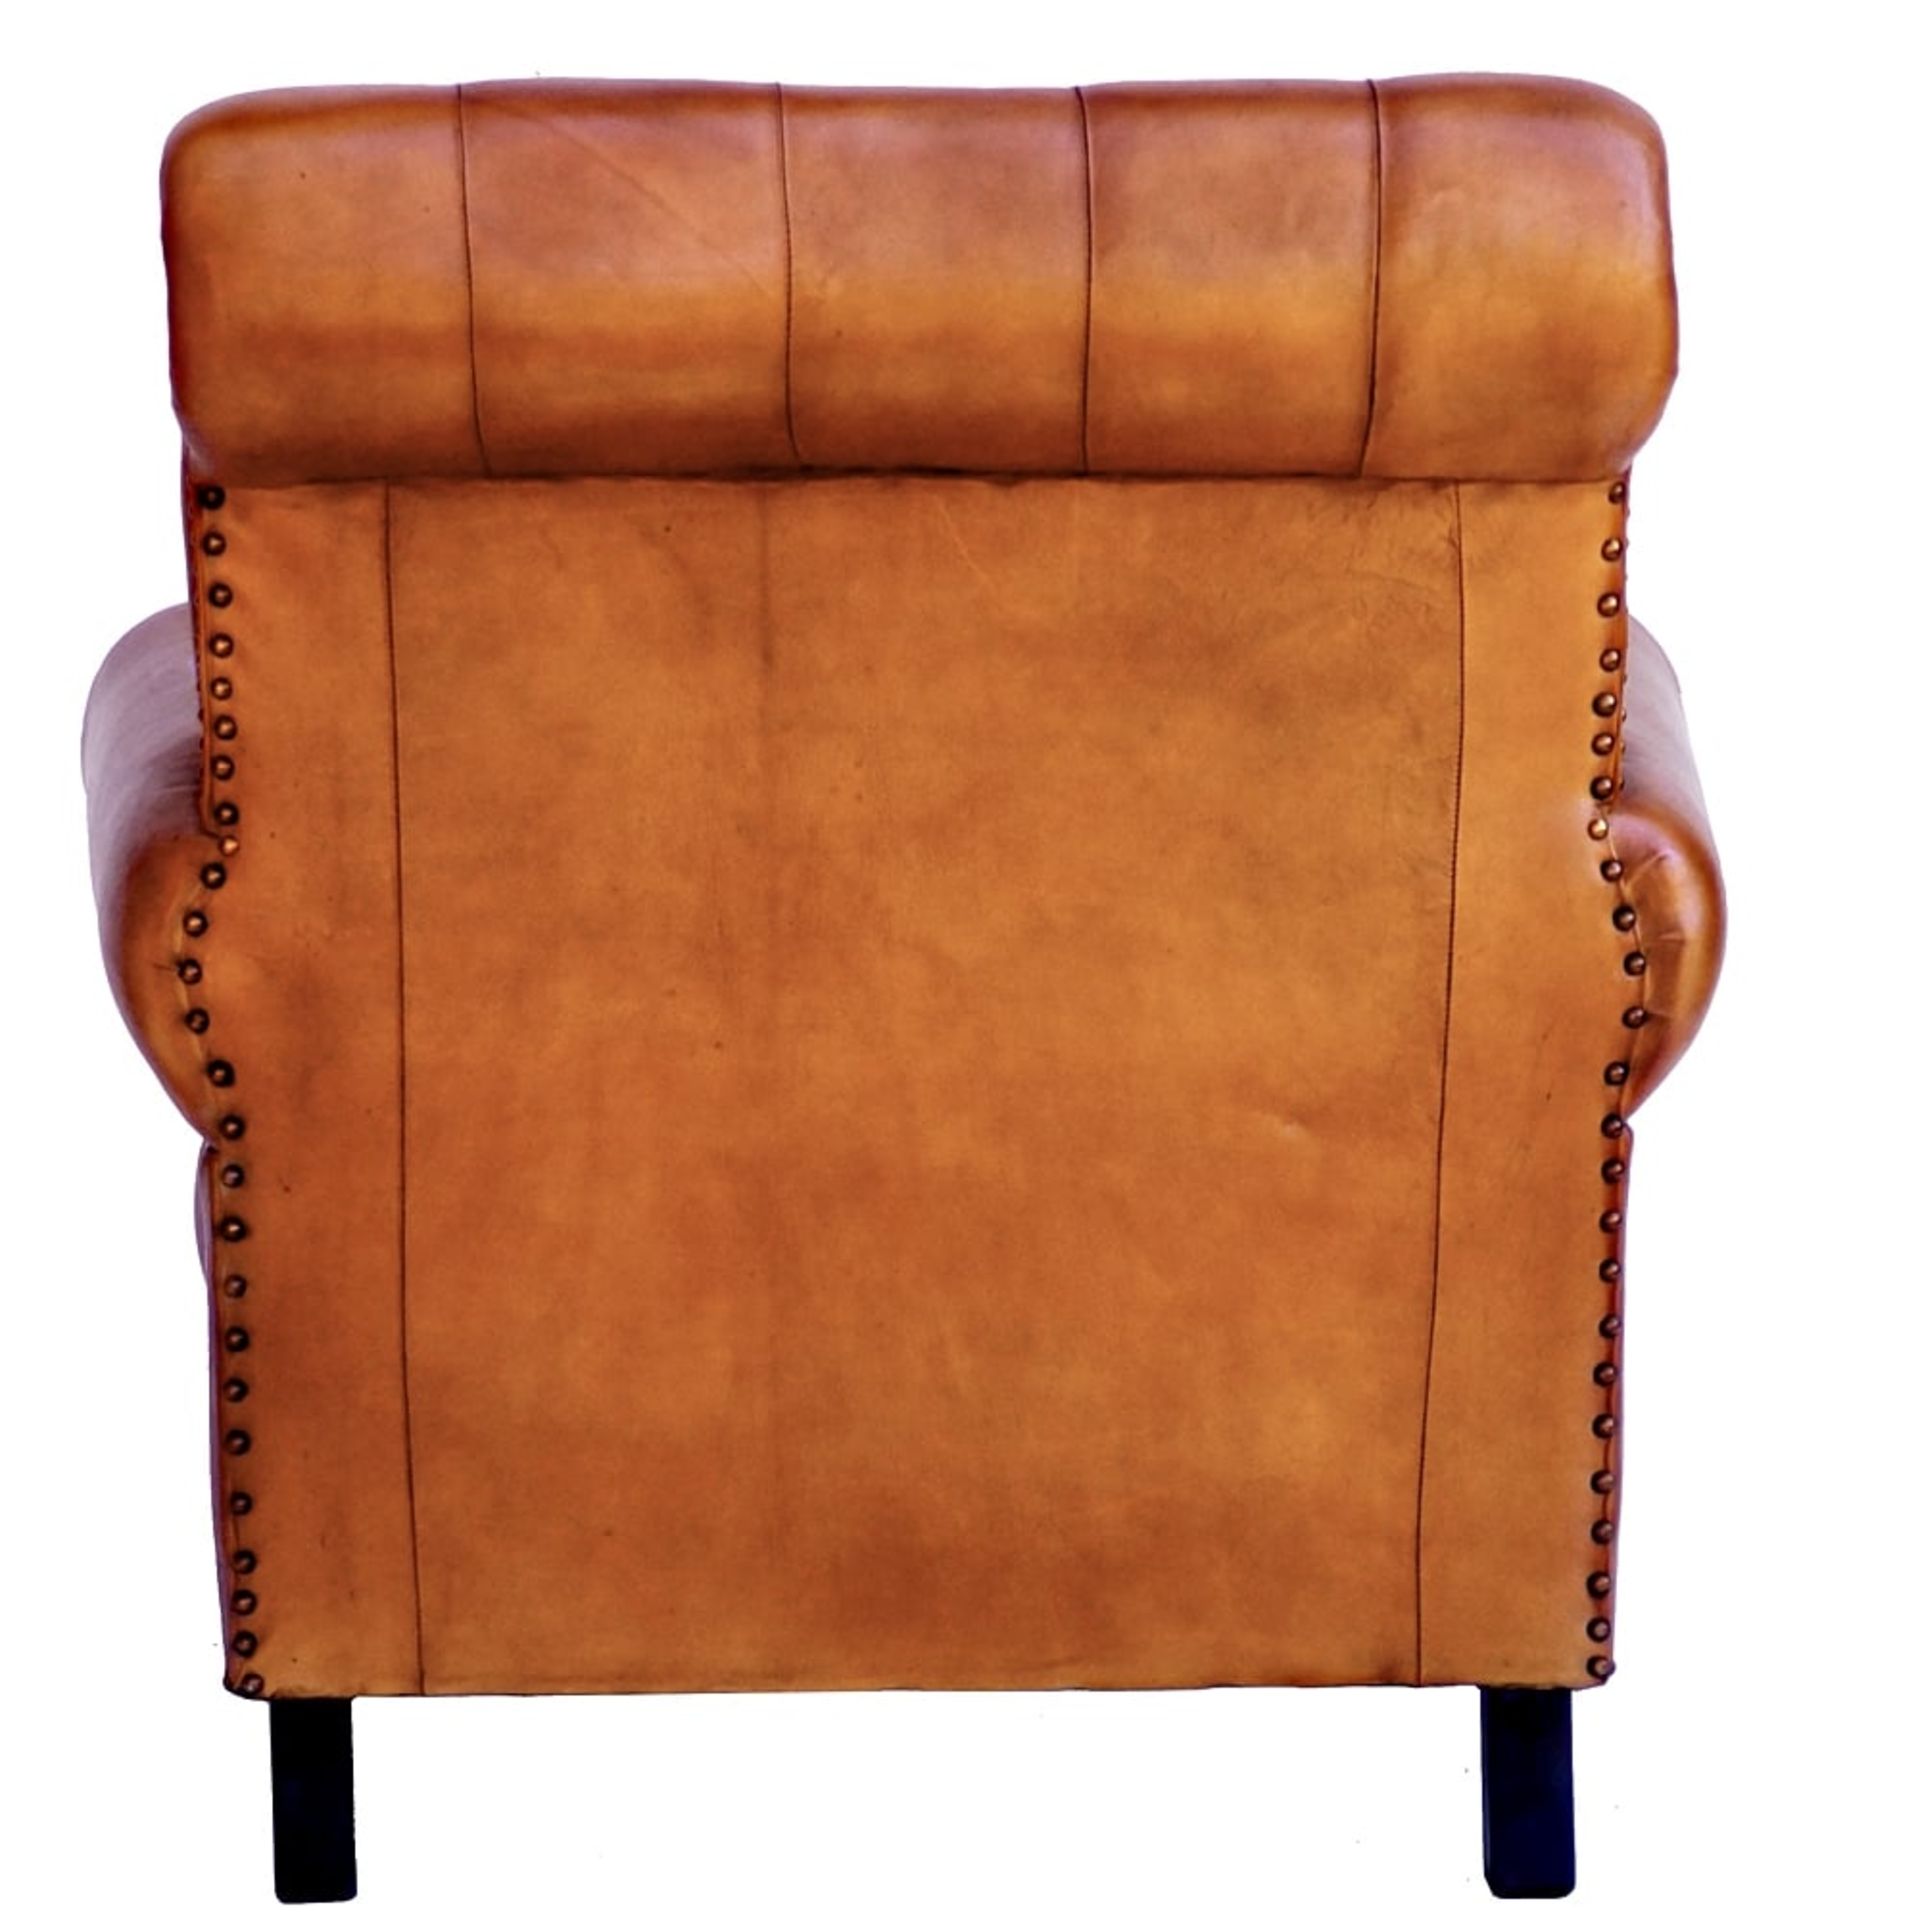 Story High Back Leather Armchair - Image 4 of 9